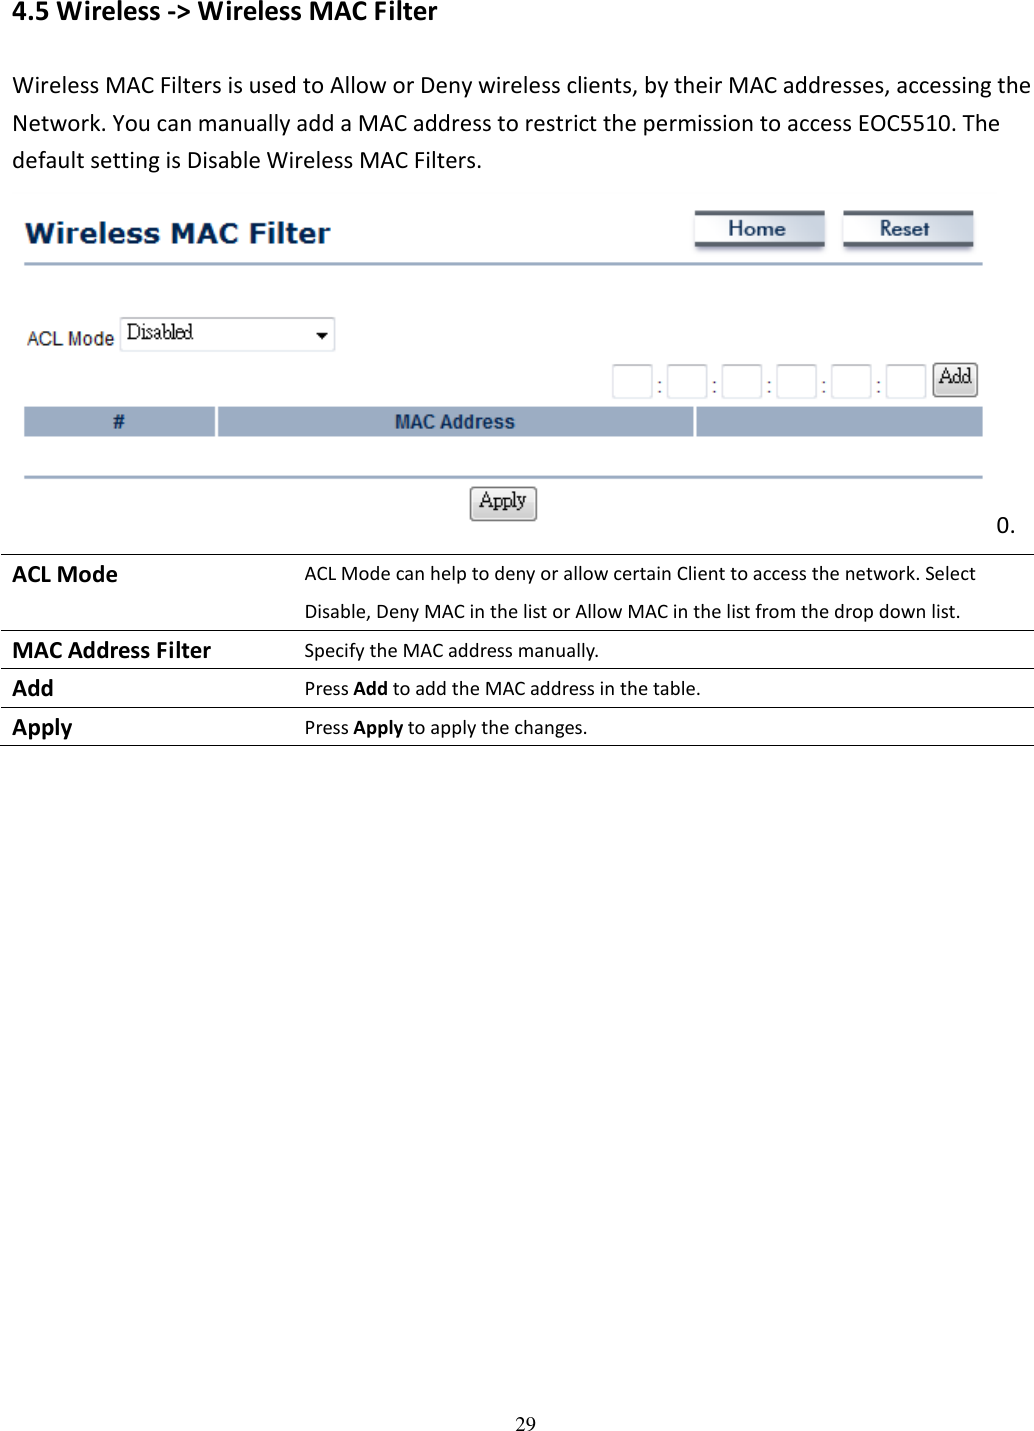 29   4.5 Wireless -&gt; Wireless MAC Filter Wireless MAC Filters is used to Allow or Deny wireless clients, by their MAC addresses, accessing the Network. You can manually add a MAC address to restrict the permission to access EOC5510. The default setting is Disable Wireless MAC Filters. 0. ACL Mode ACL Mode can help to deny or allow certain Client to access the network. Select Disable, Deny MAC in the list or Allow MAC in the list from the drop down list. MAC Address Filter Specify the MAC address manually. Add Press Add to add the MAC address in the table. Apply Press Apply to apply the changes.    